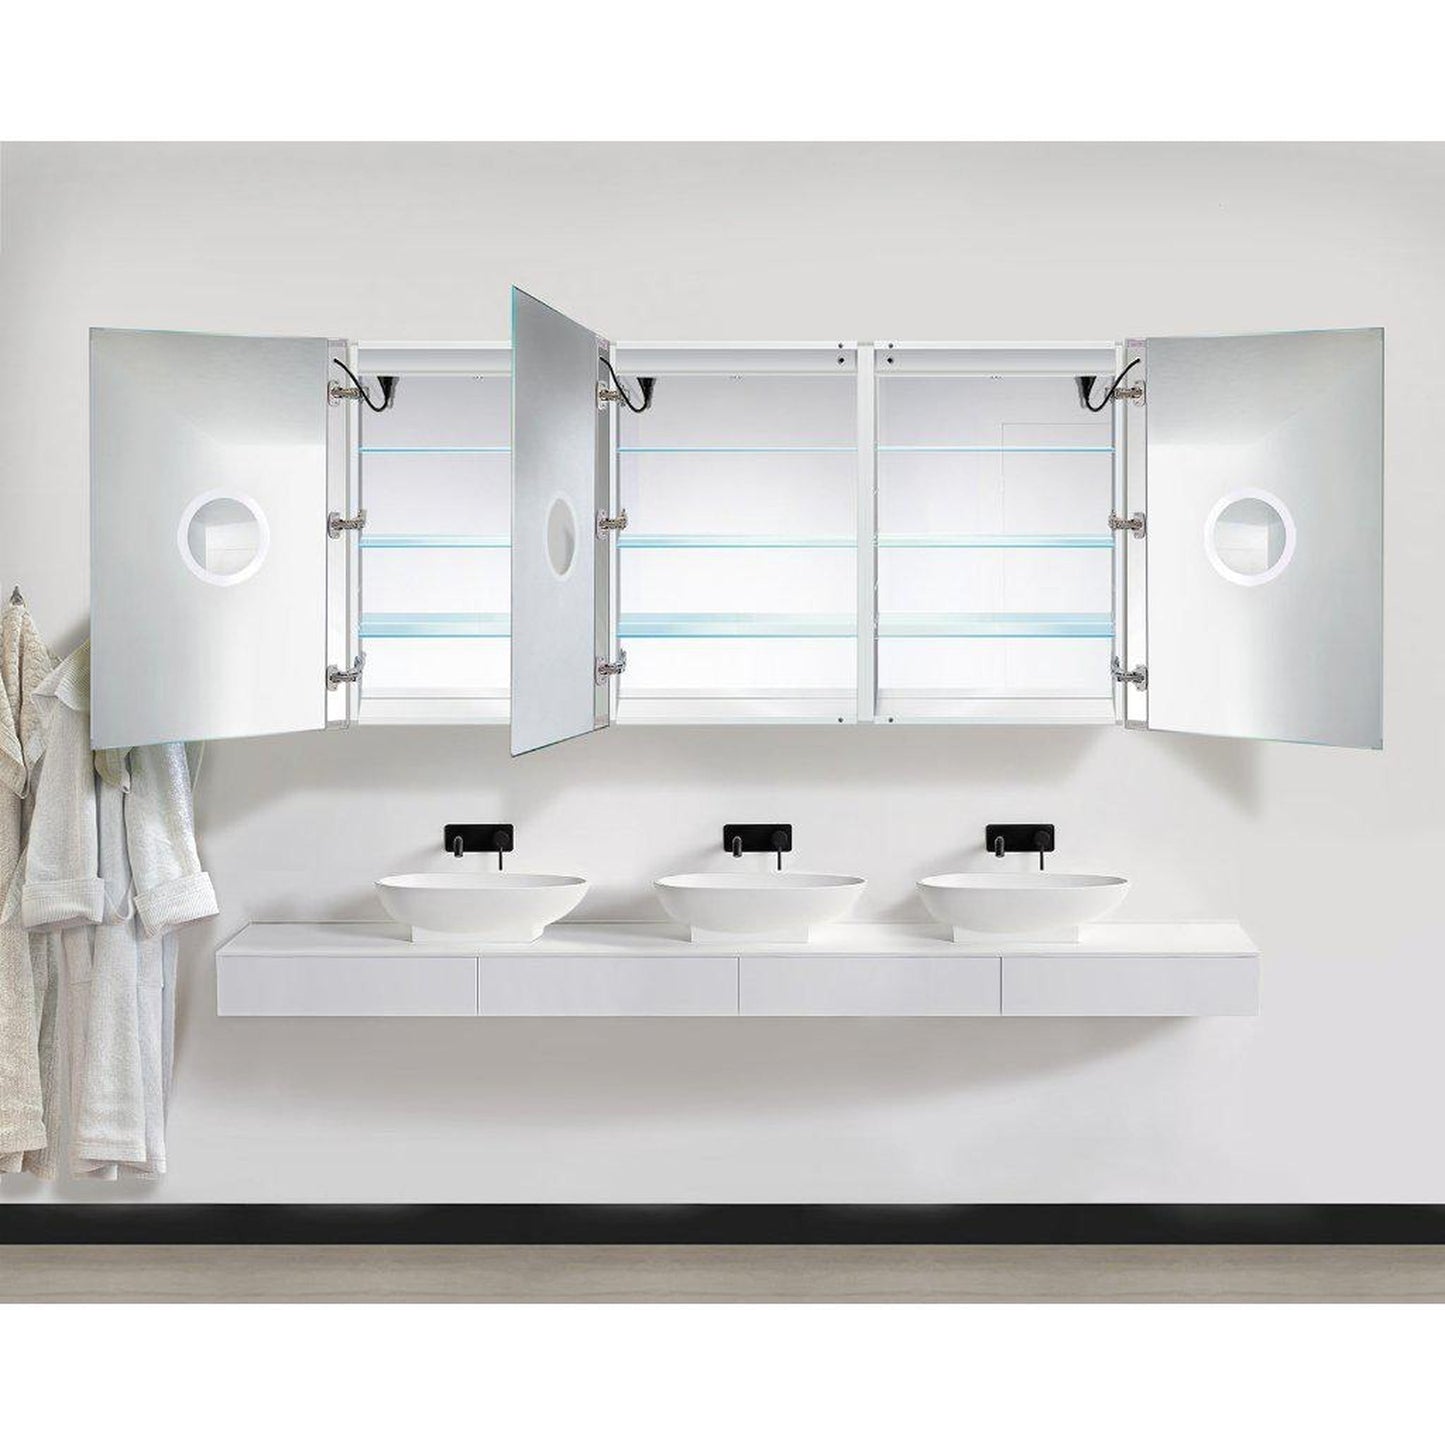 Krugg Reflections Svange 72" x 36" 5000K Tri-View Left-Left-Right Opening Recessed/Surface-Mount Illuminated Silver Backed LED Medicine Cabinet Mirror With Built-in Defogger, Dimmer and Electrical Outlet